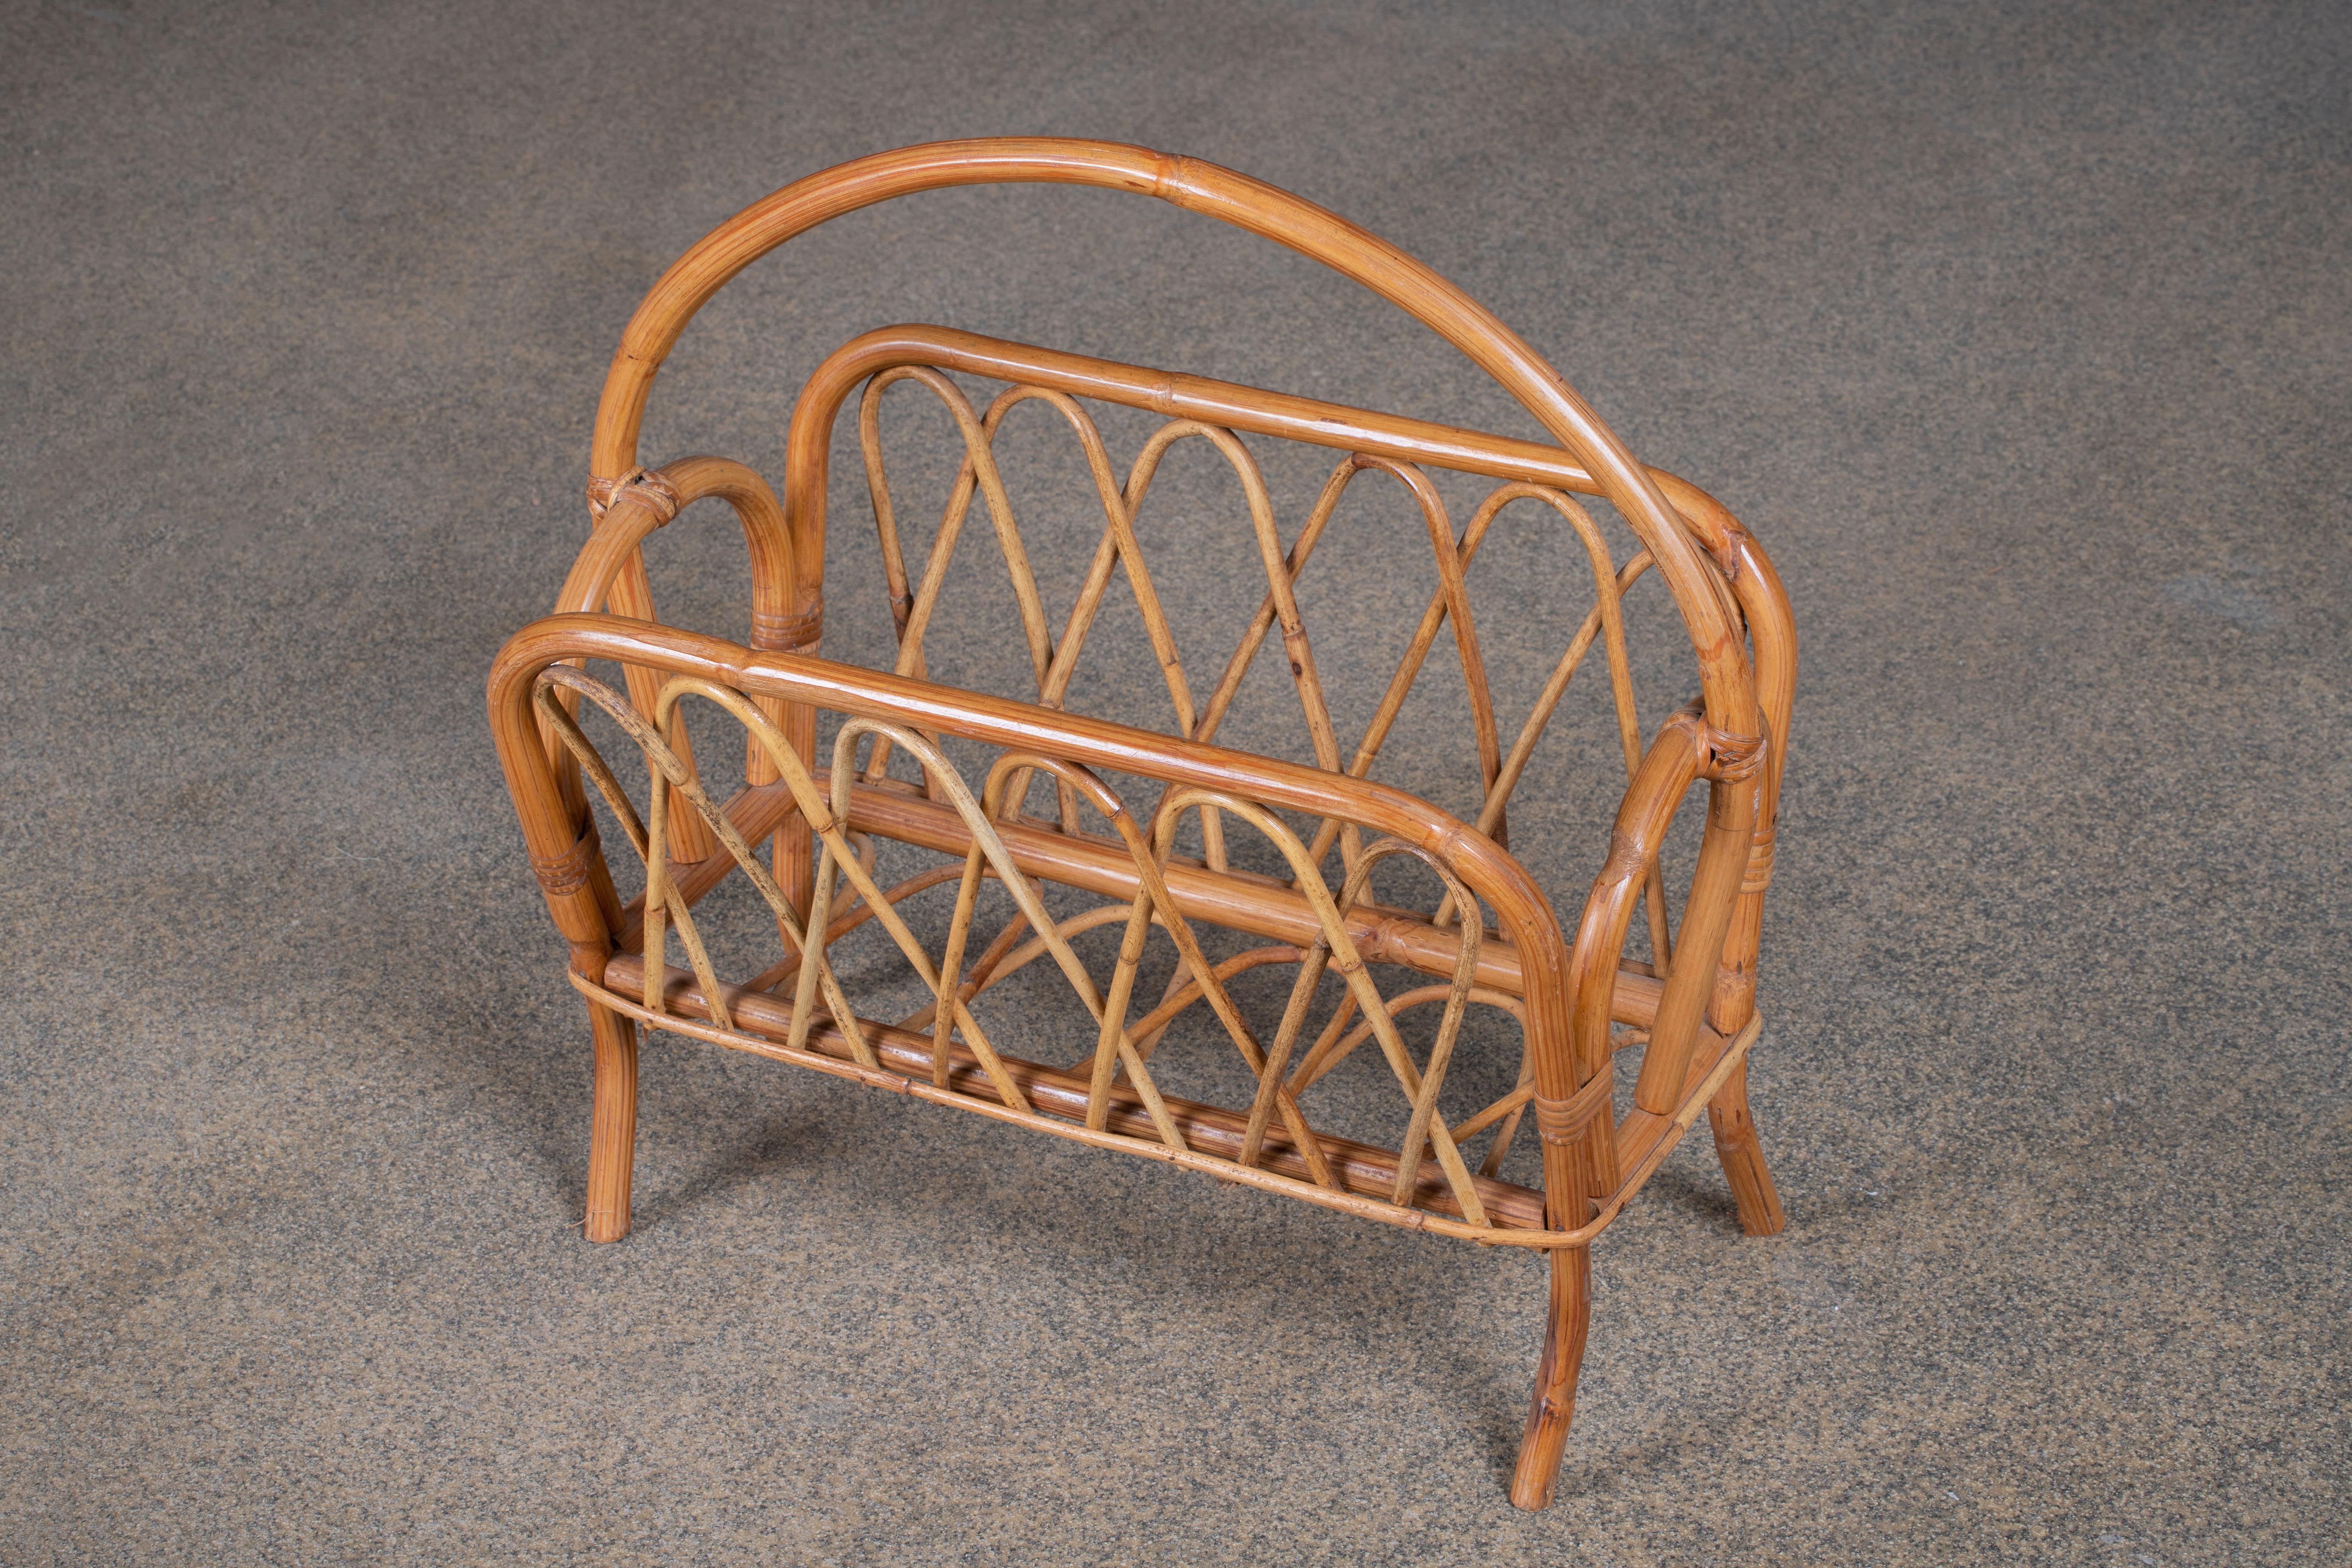 French Provincial Italian Bamboo Rattan Bohemian French Riviera Magazine Rack Stand, 1960s For Sale